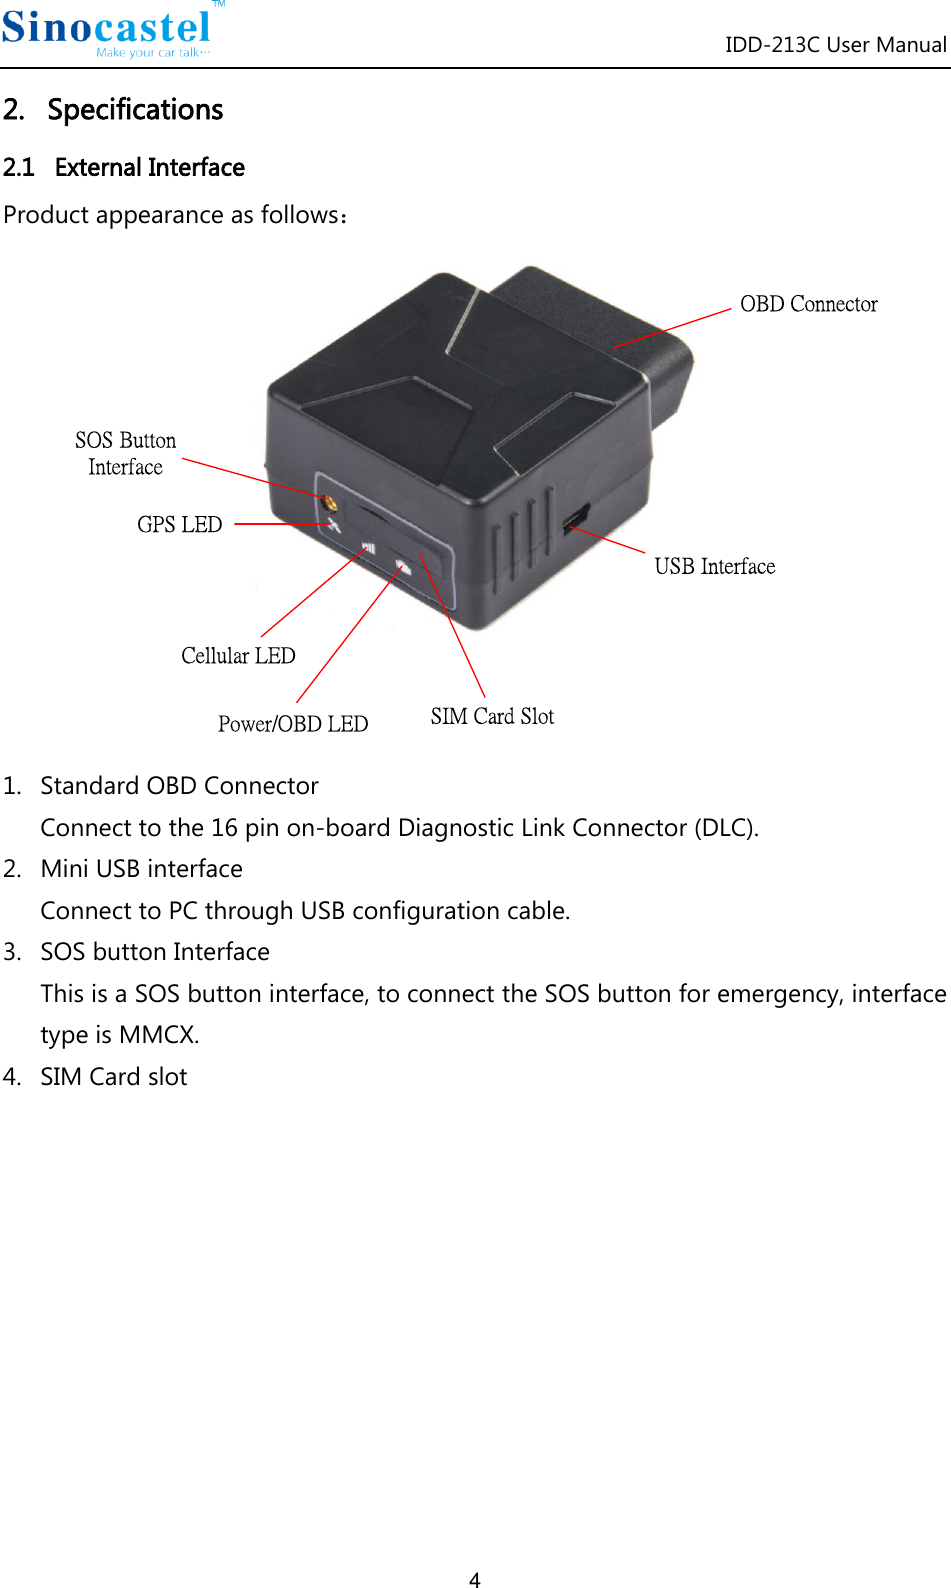 IDD-213C User Manual 4 2.   Specifications 2.1   External Interface Product appearance as follows： SOS Button InterfaceGPS LEDCellular LEDPower/OBD LED SIM Card SlotOBD ConnectorUSB Interface 1. Standard OBD Connector Connect to the 16 pin on-board Diagnostic Link Connector (DLC). 2. Mini USB interface Connect to PC through USB configuration cable. 3. SOS button Interface This is a SOS button interface, to connect the SOS button for emergency, interface type is MMCX. 4. SIM Card slot           